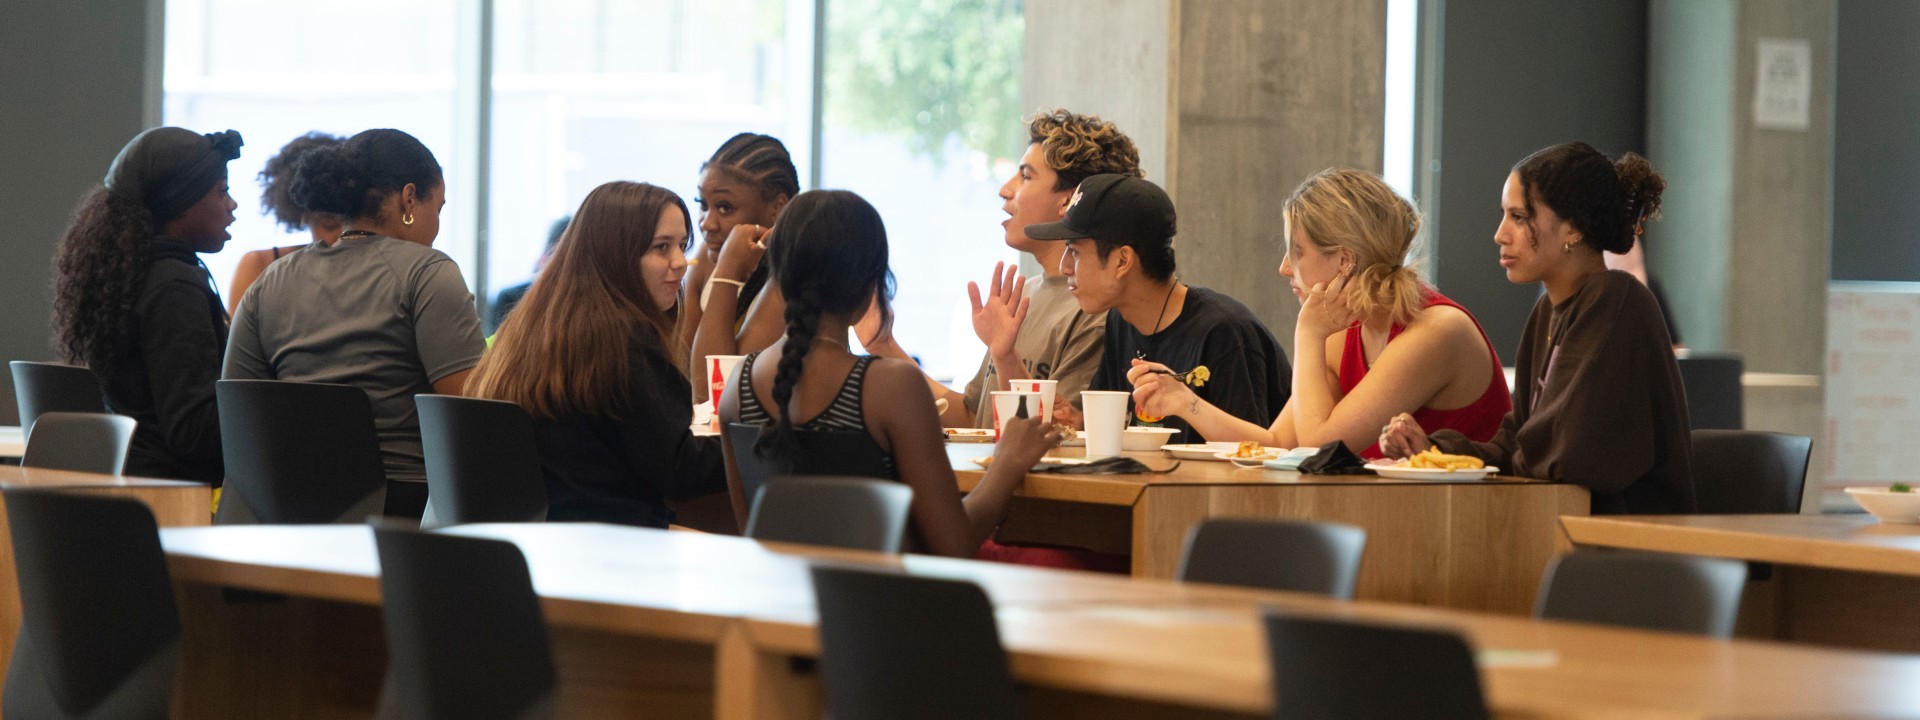 A group of students eating and talking.